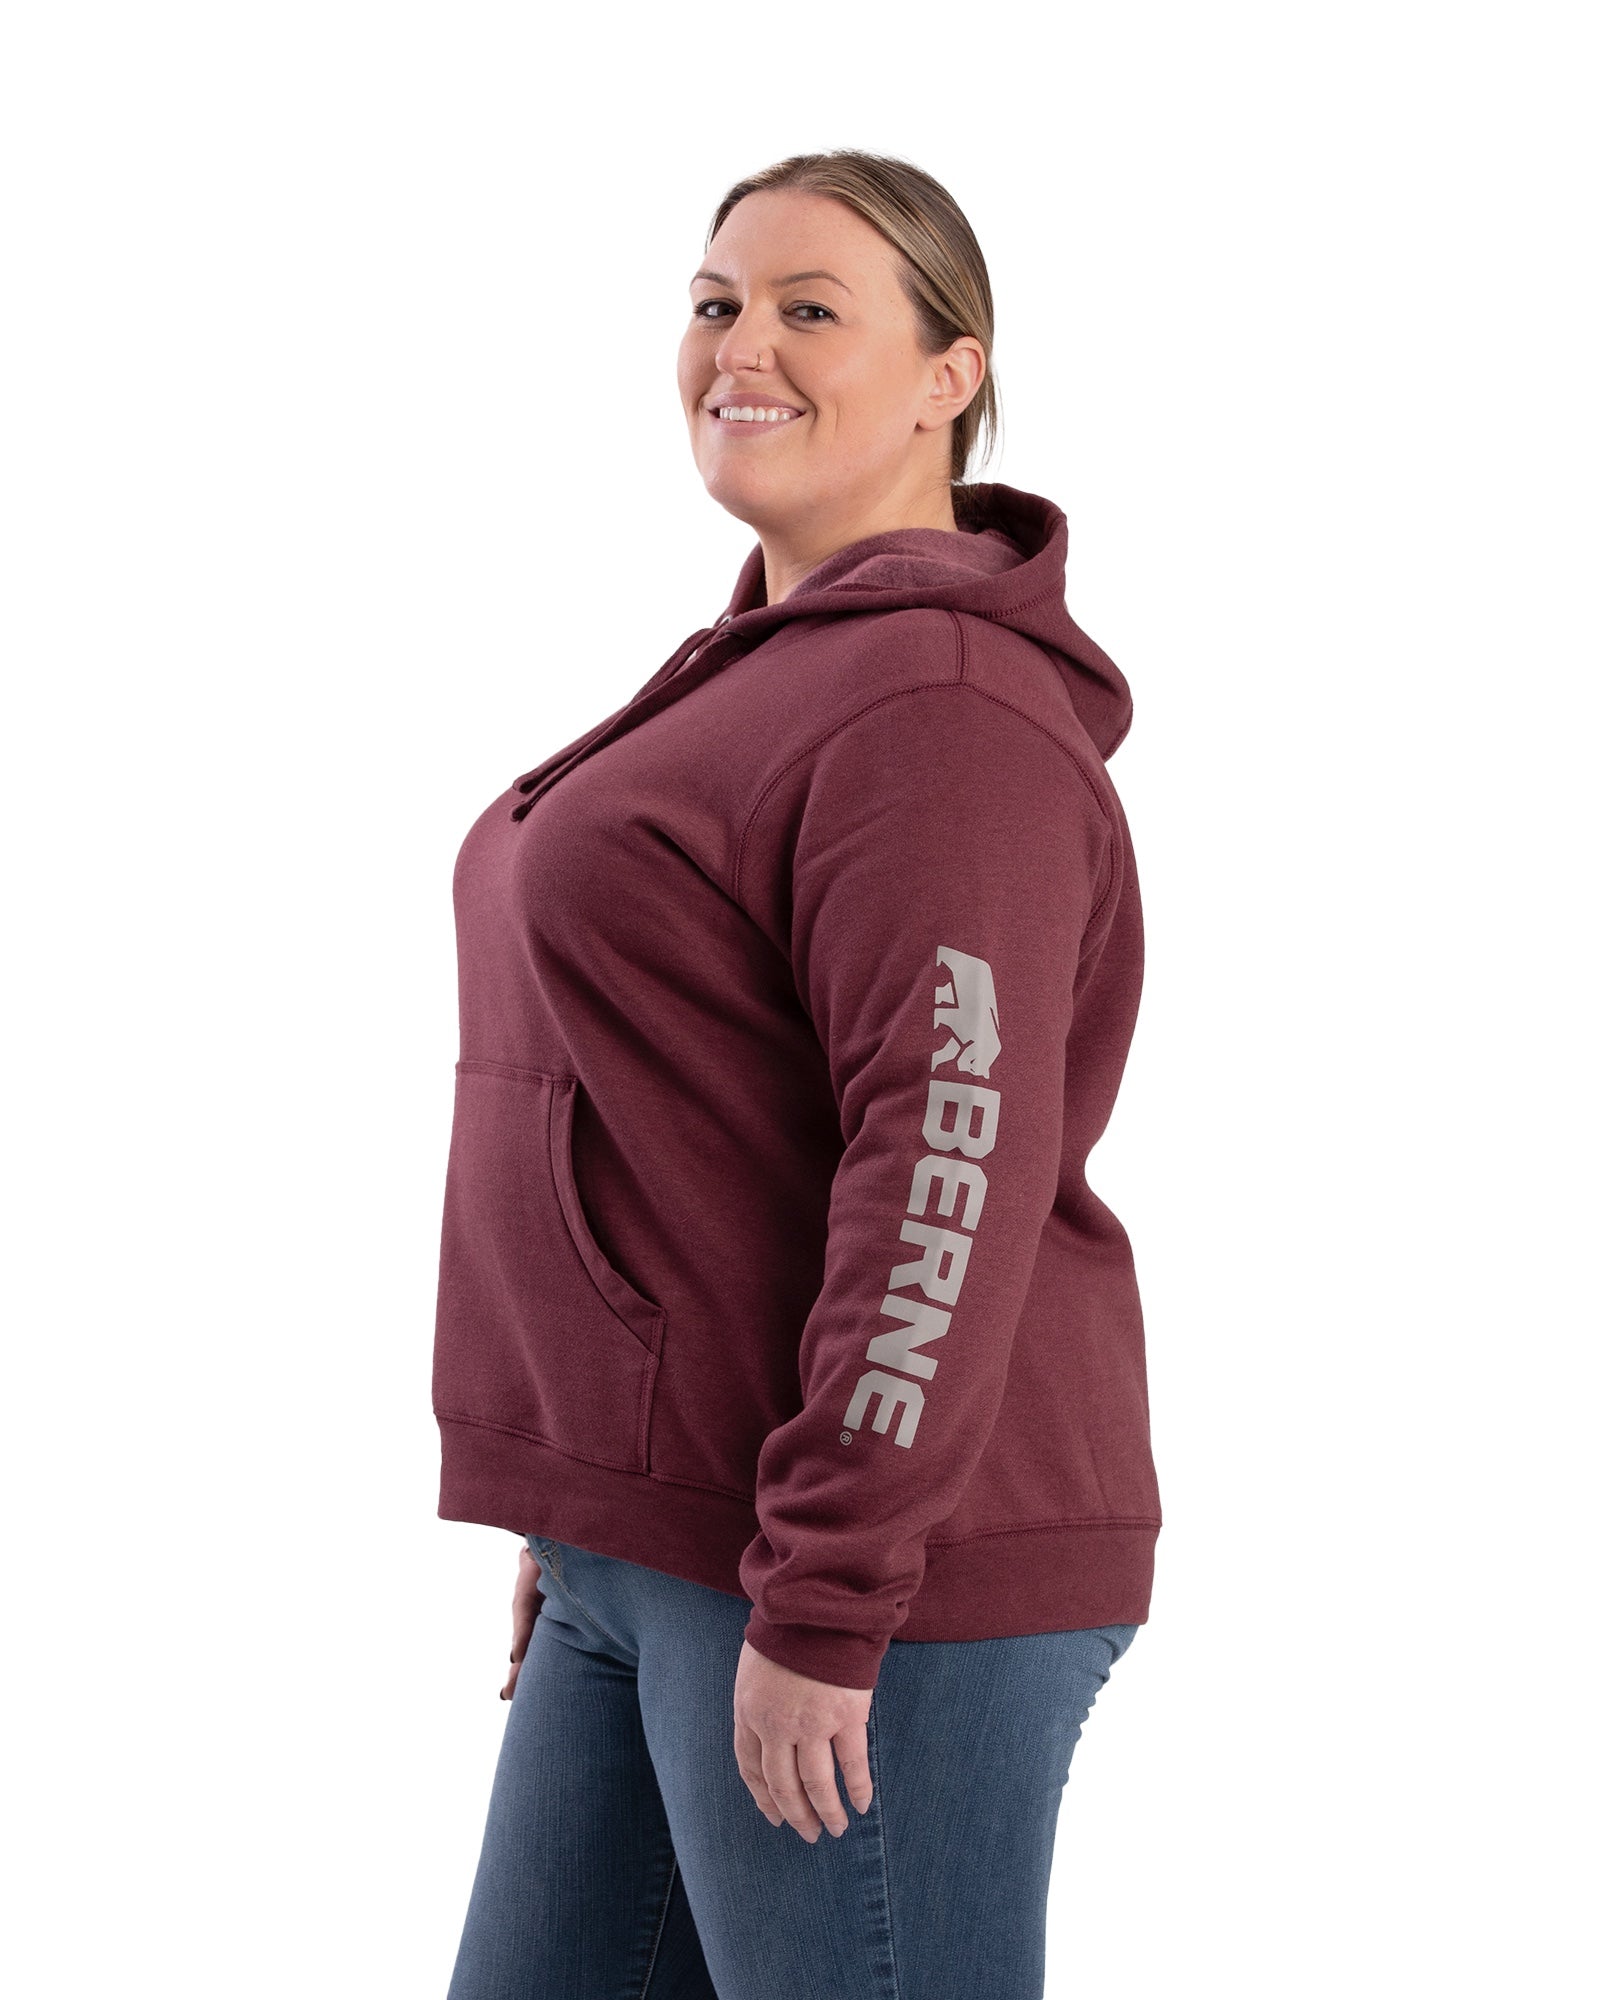 WSP401CAB Women's Signature Sleeve Hooded Pullover